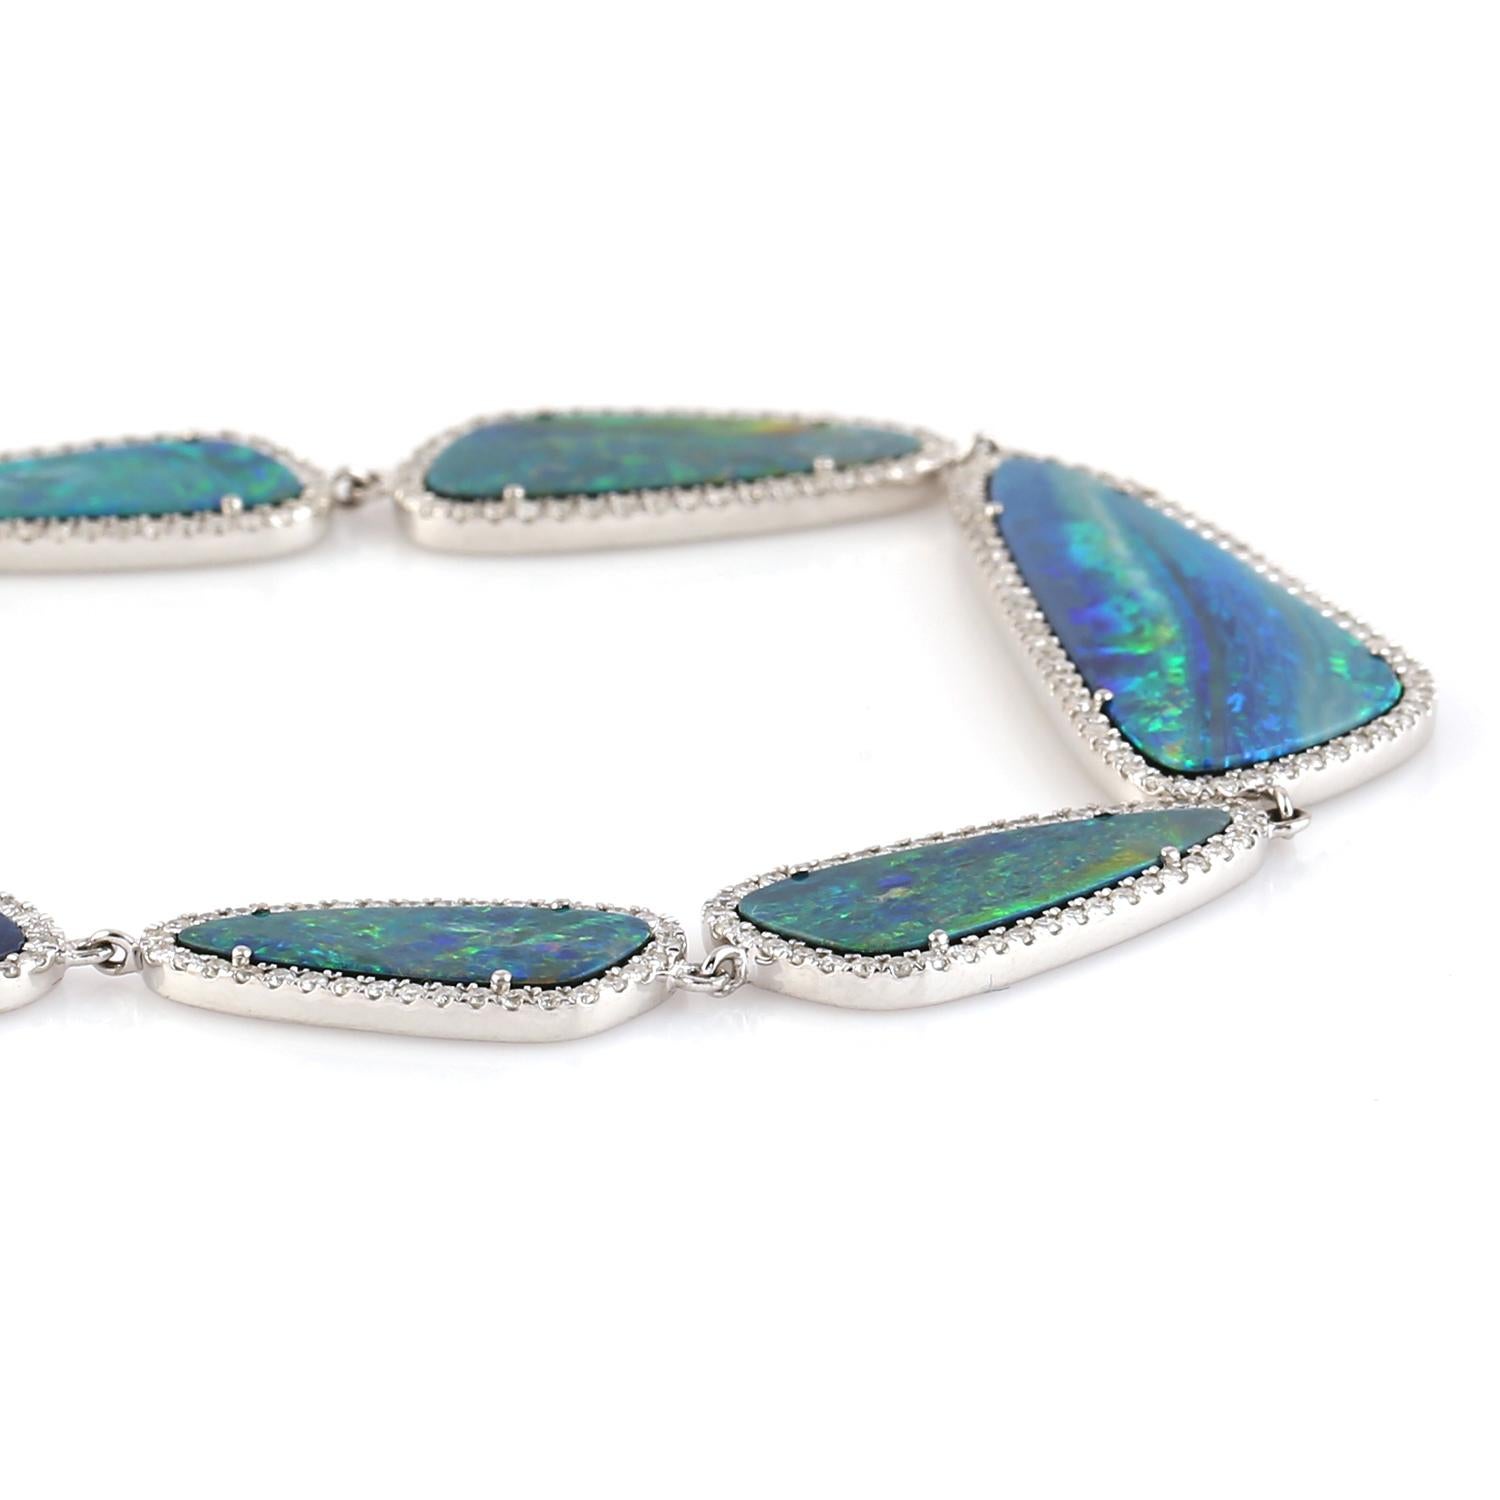 Mixed Cut 28.41 ct Ethiopian Opal Chain Necklace With Diamonds Made In 18k White Gold For Sale